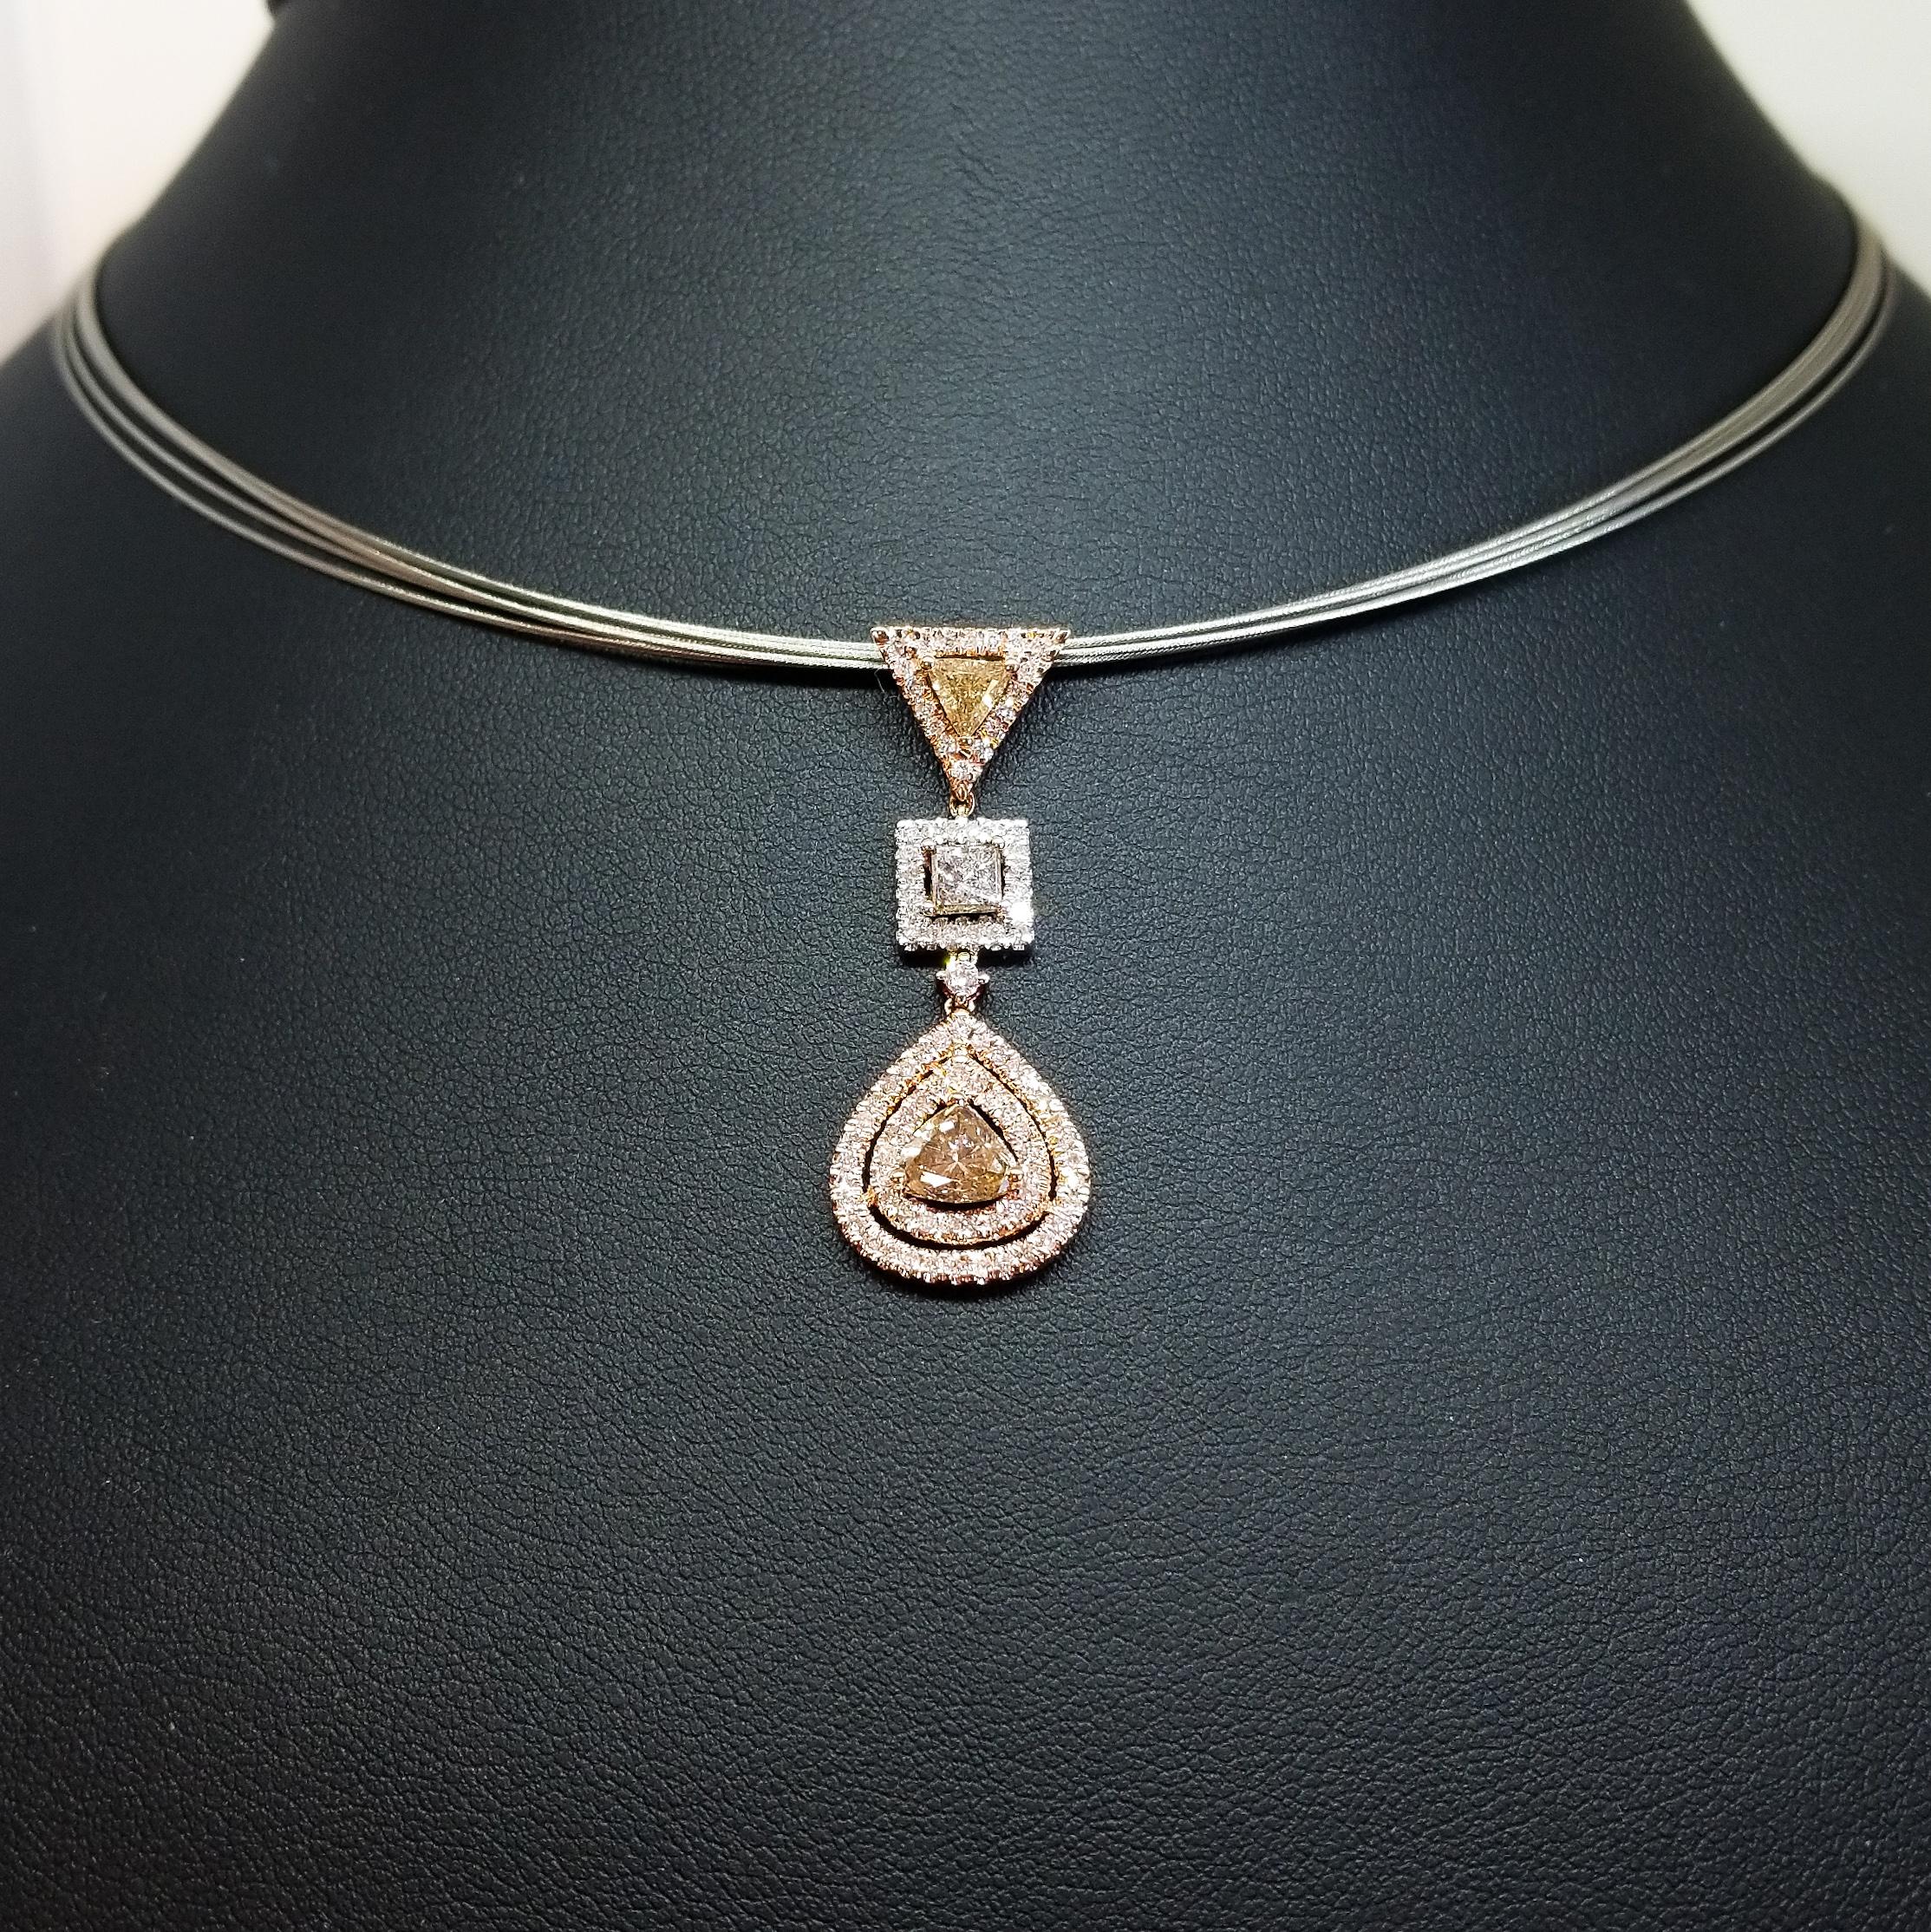 A Retro Contemporary Drop Pendant in 18 Karat Rose and White Gold features Natural Fancy and White Diamonds of 2.10 Carats total weight. The Diamonds are of various sizes and cuts including the larger three Diamonds in the Drop consisting of a 0.33